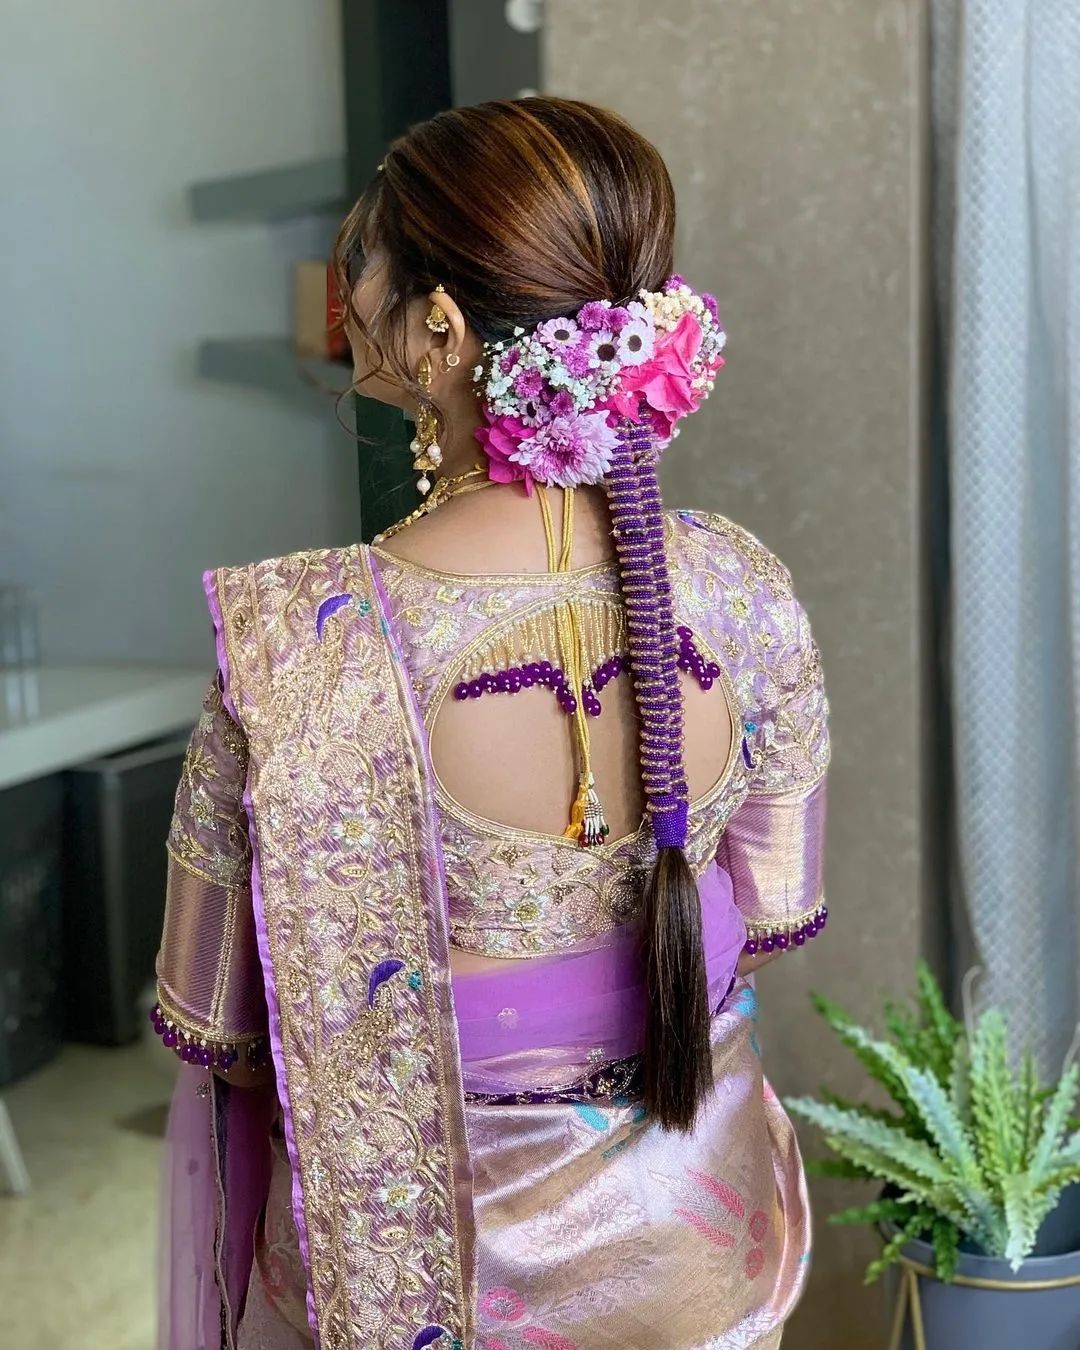 Beyond Basics: 30 Diverse Hairstyles for a Saree